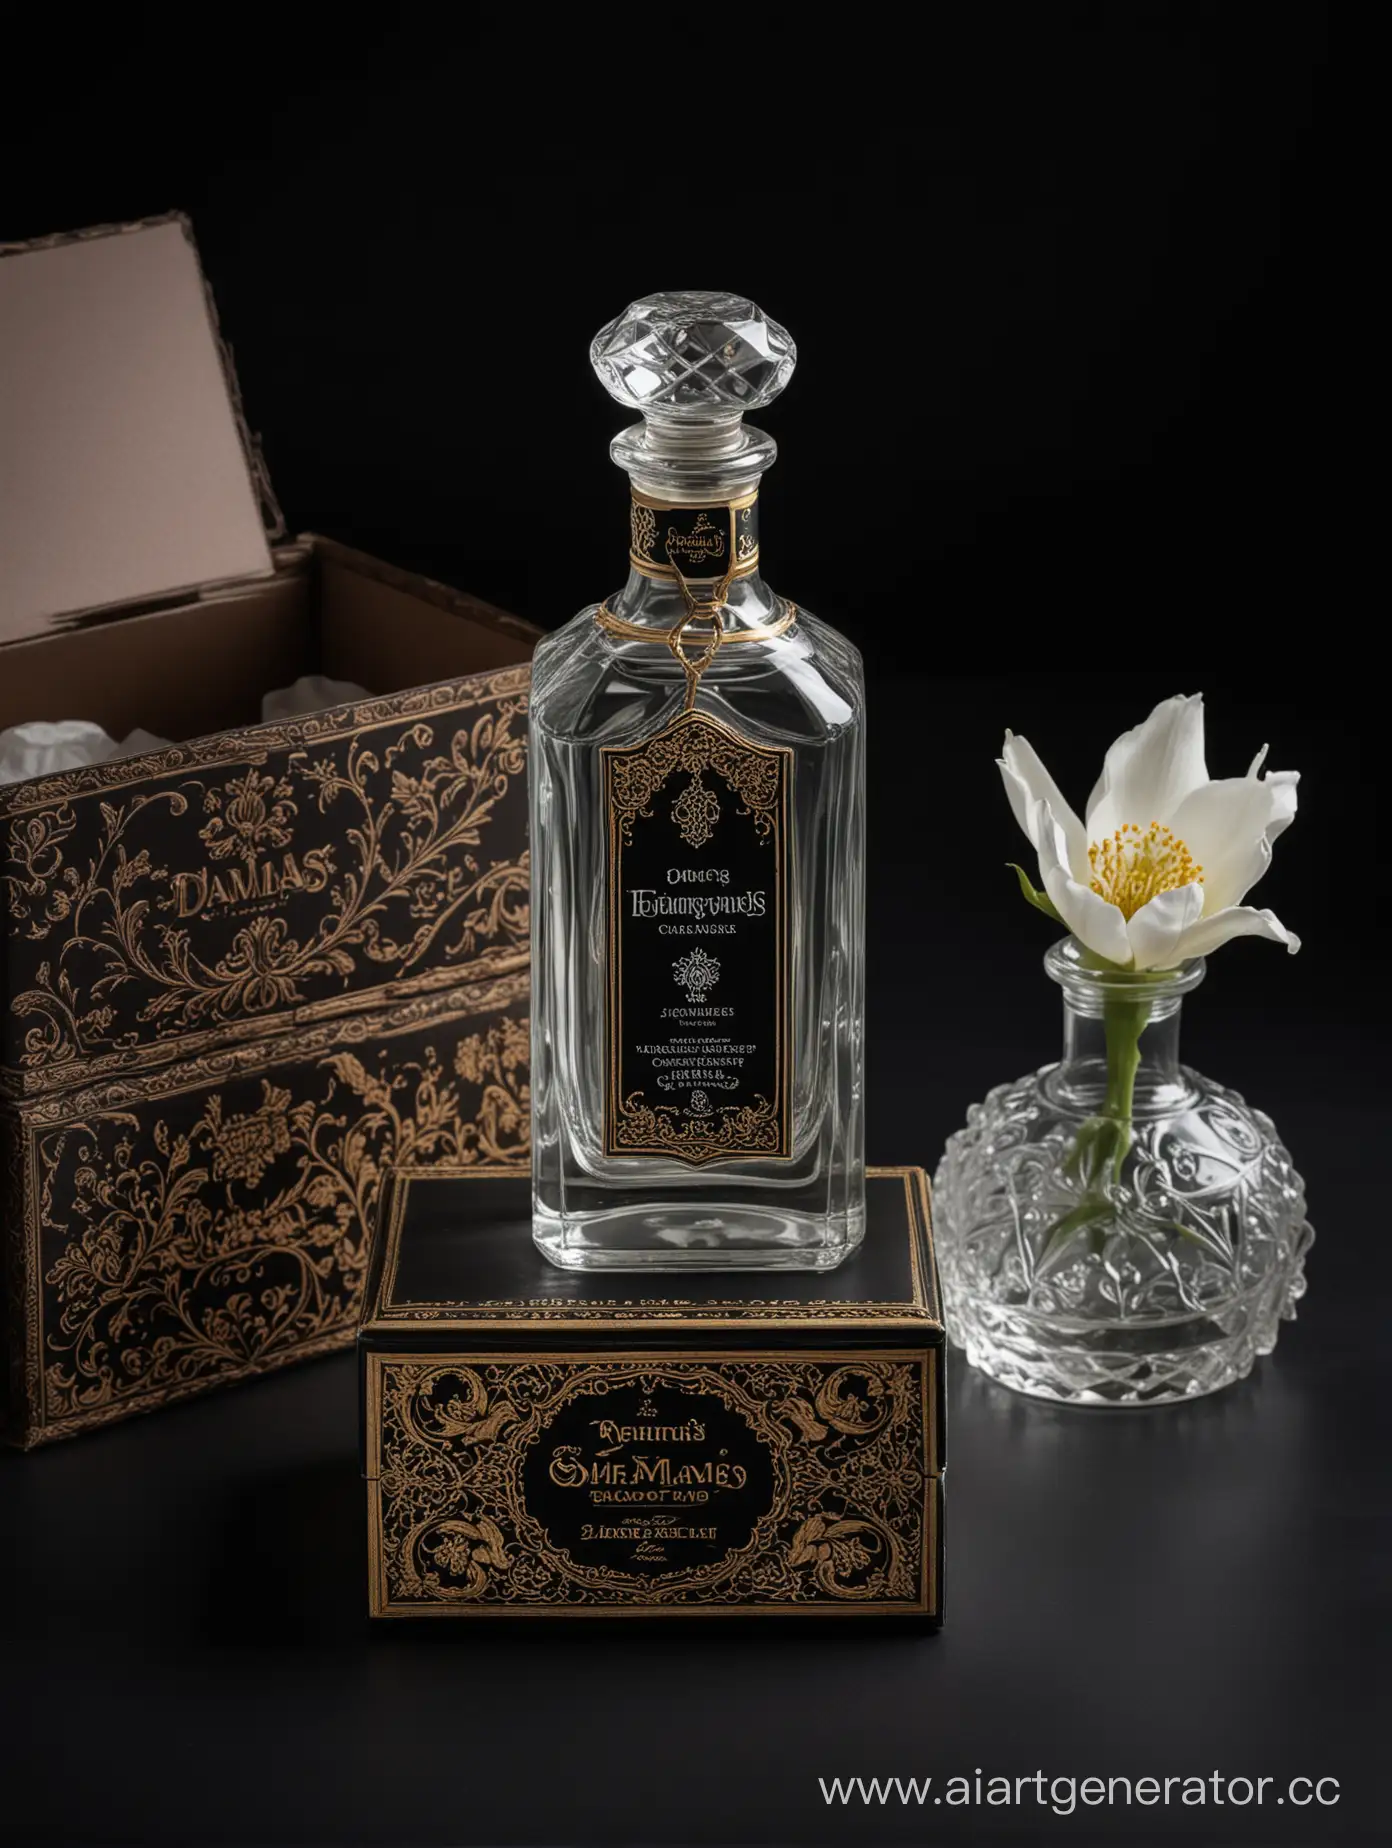 Damas-Cologne-Bottle-and-Box-on-Black-Background-with-Flemish-Baroque-Influence